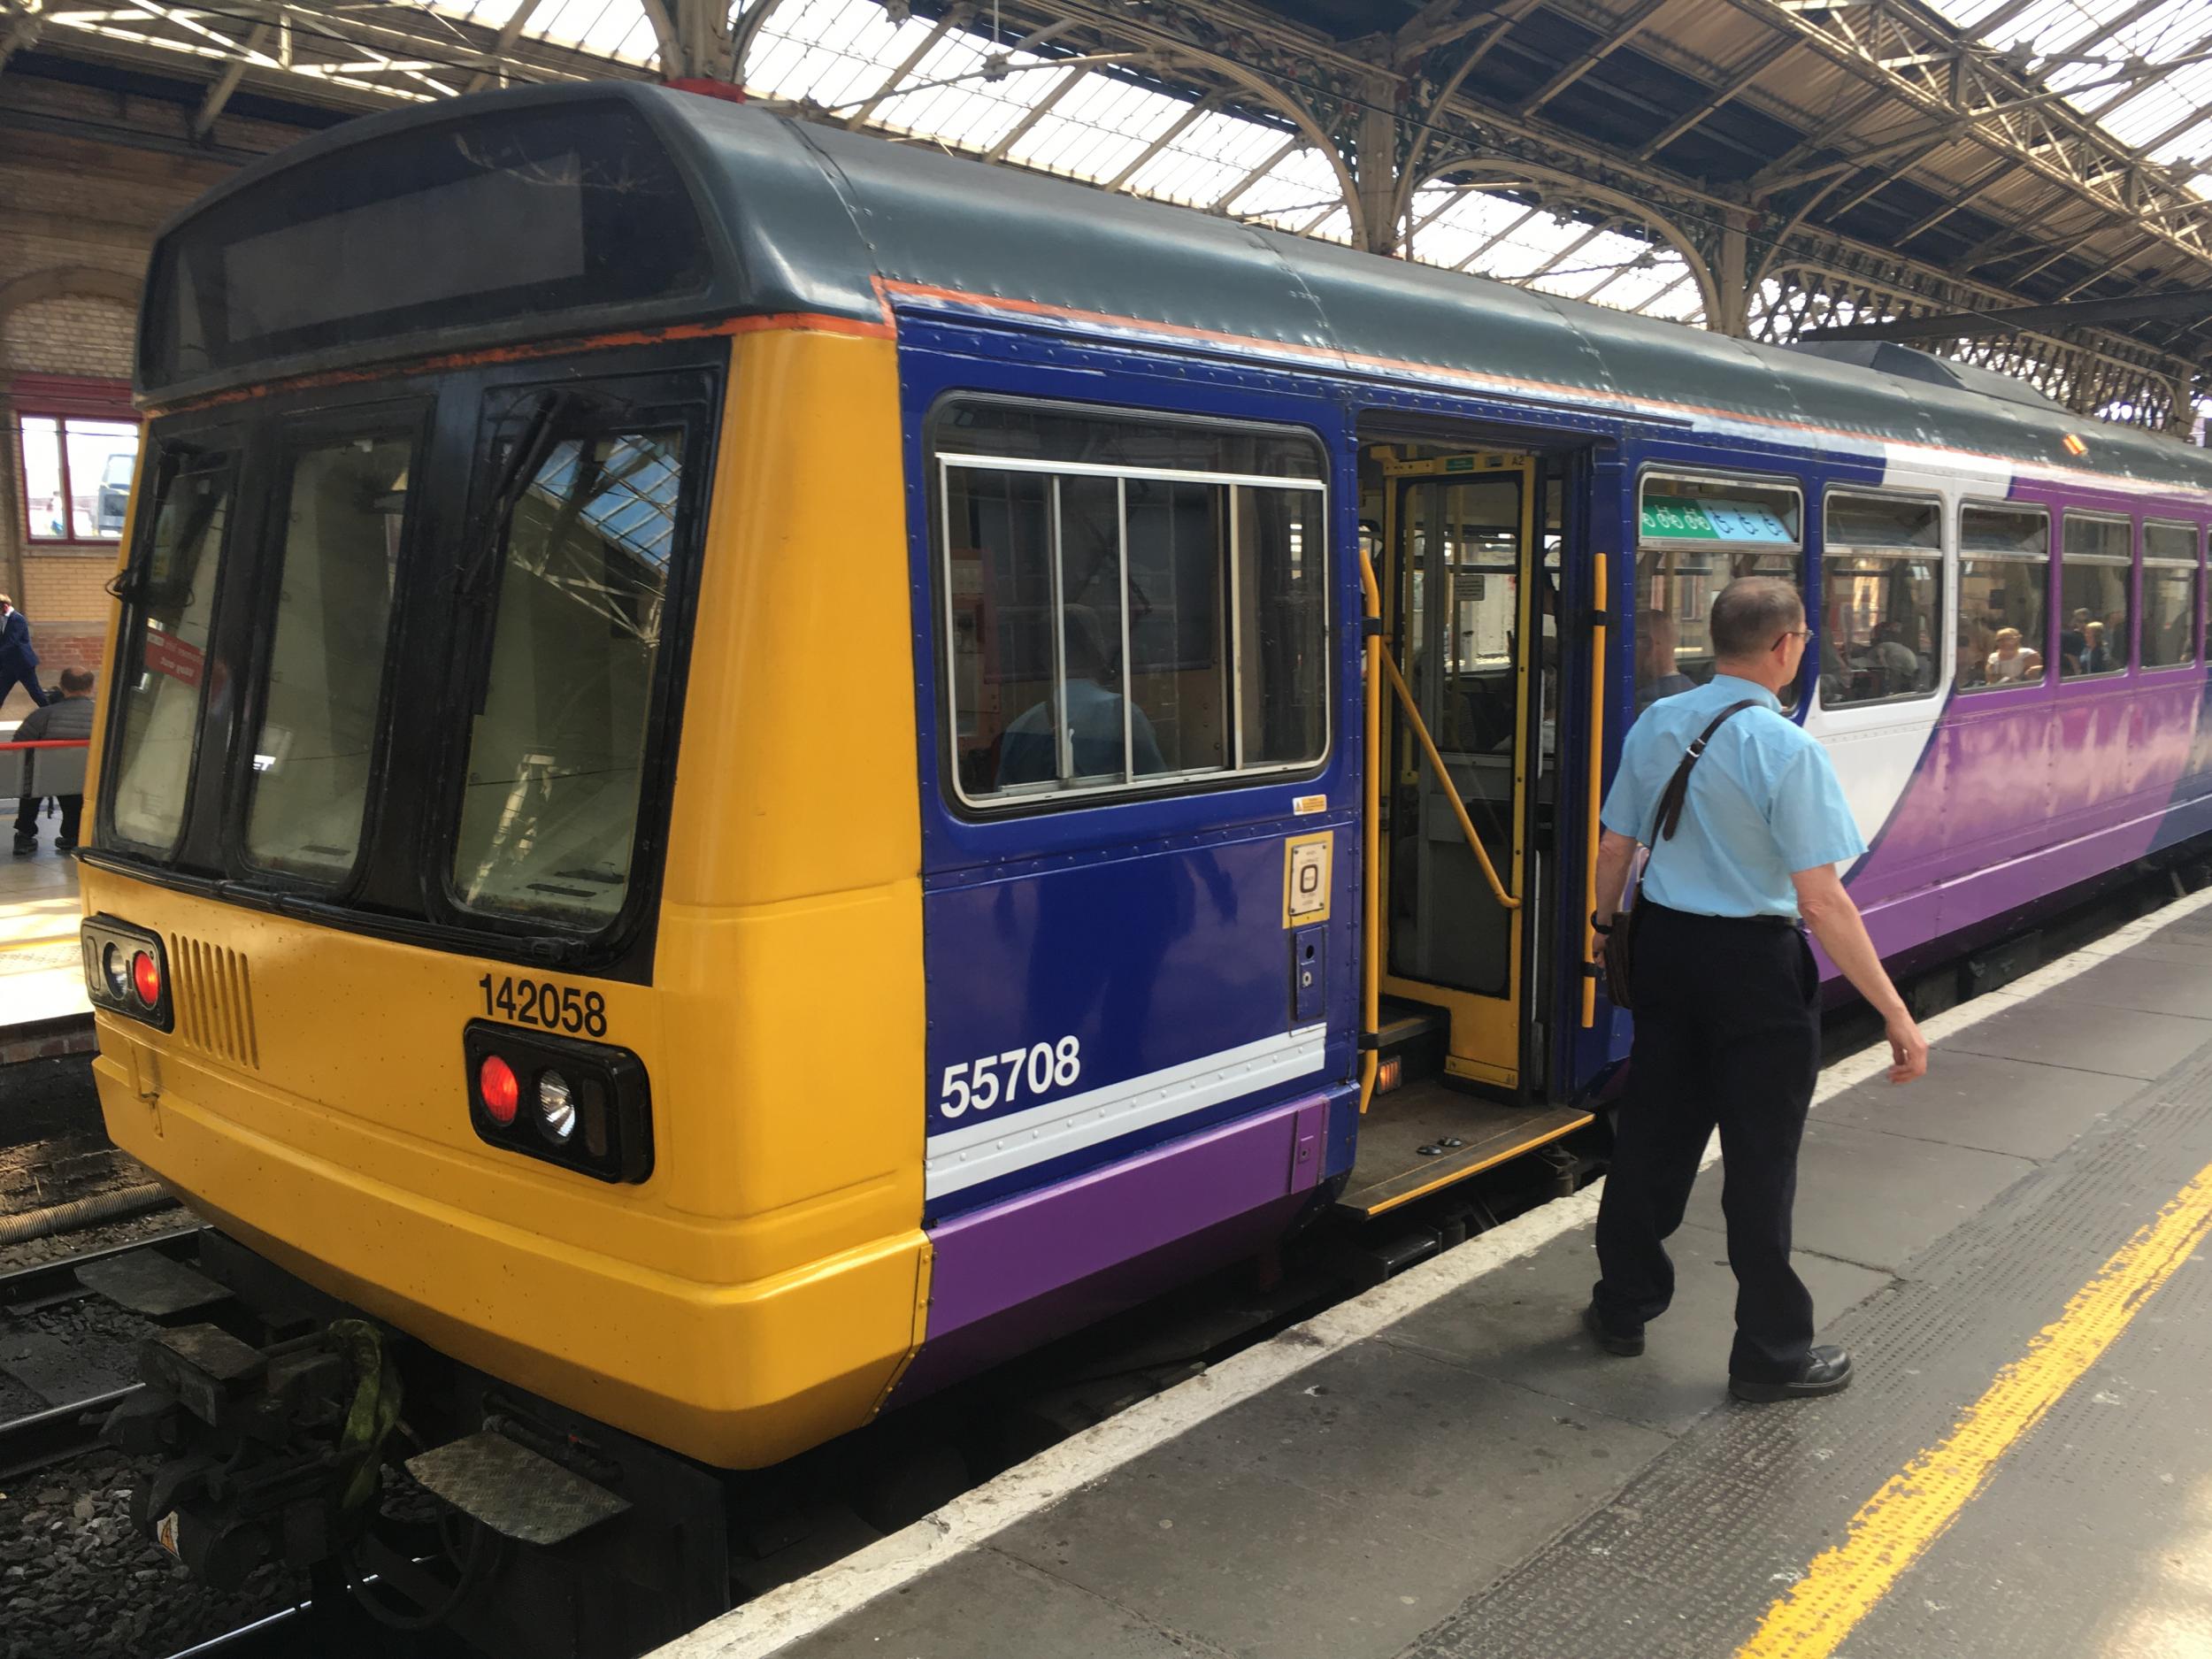 The Pacer trains were introduced as a 1980s ‘stopgap’ – but will now run into the next decade